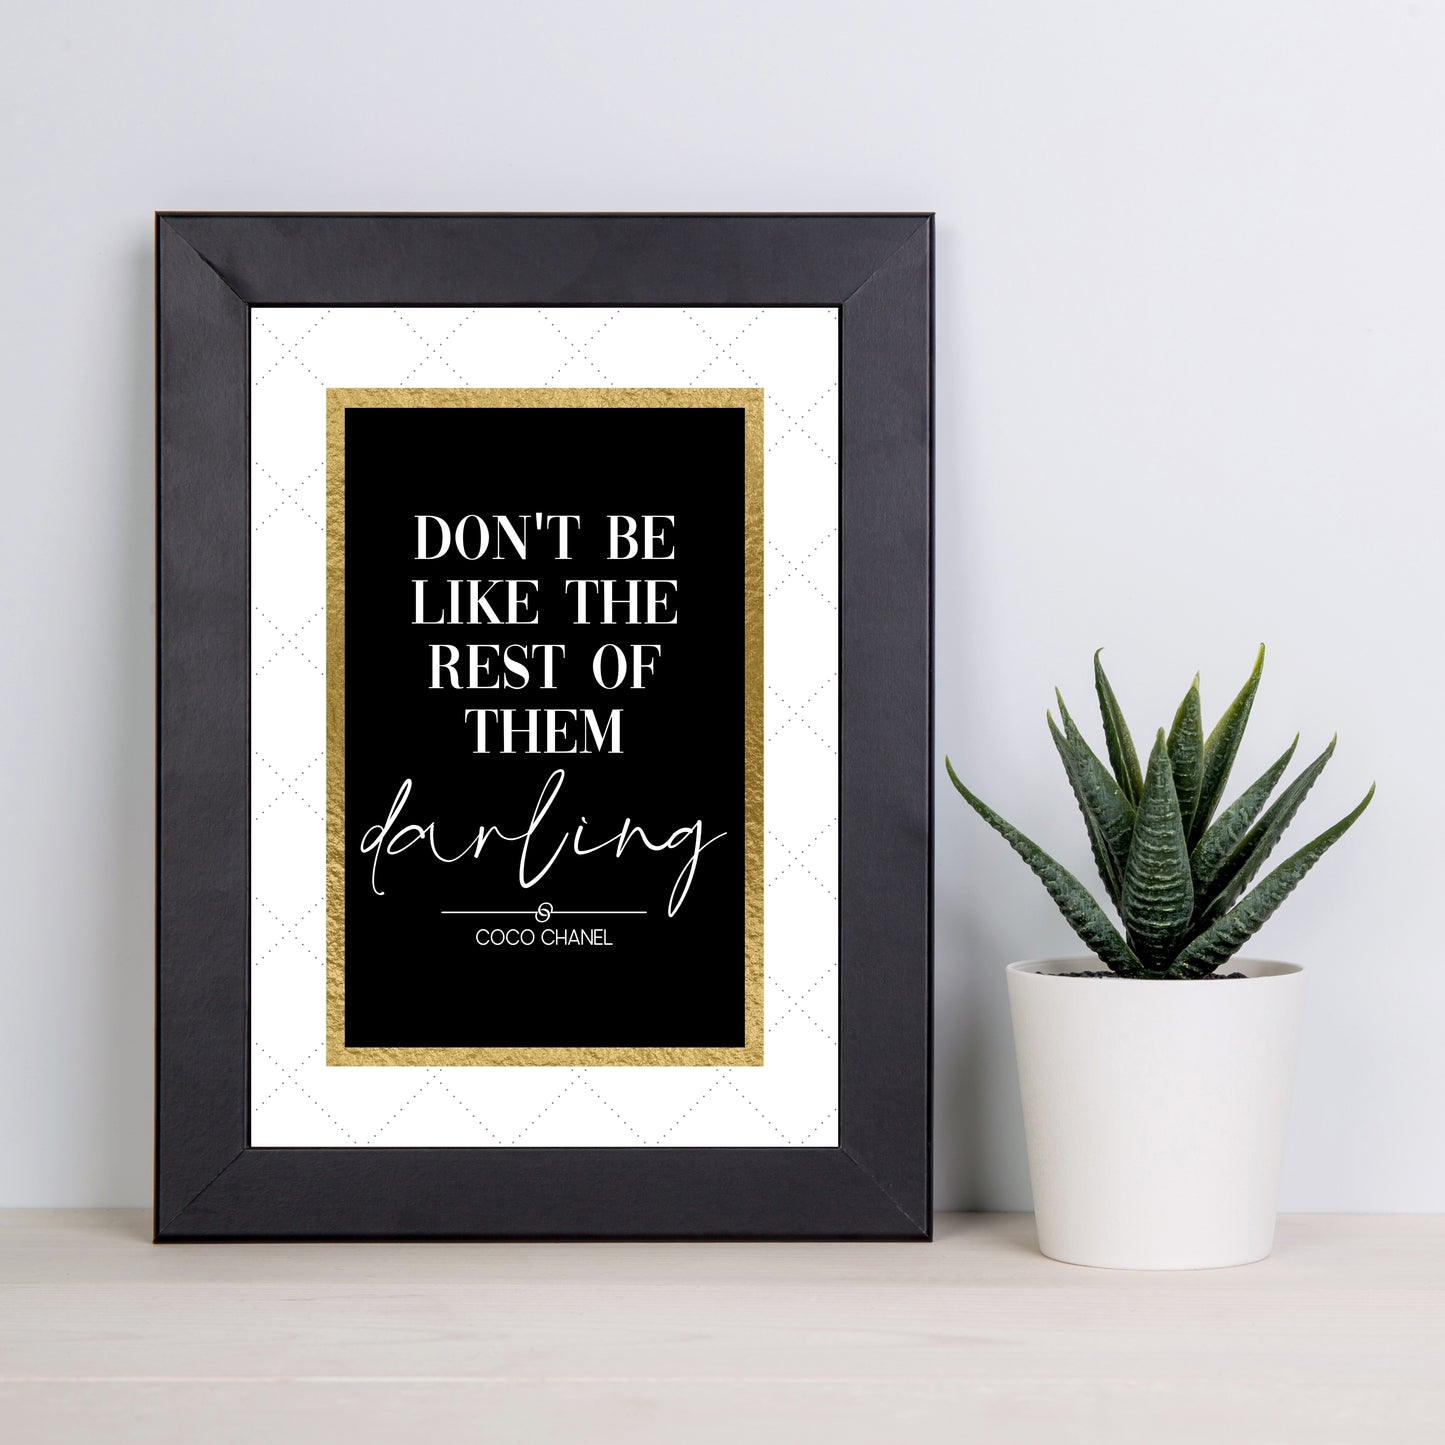 "Don't Be Like The Rest Of Them Darling," Famous Quote by Coco Chanel With Gold Border, Printable Art